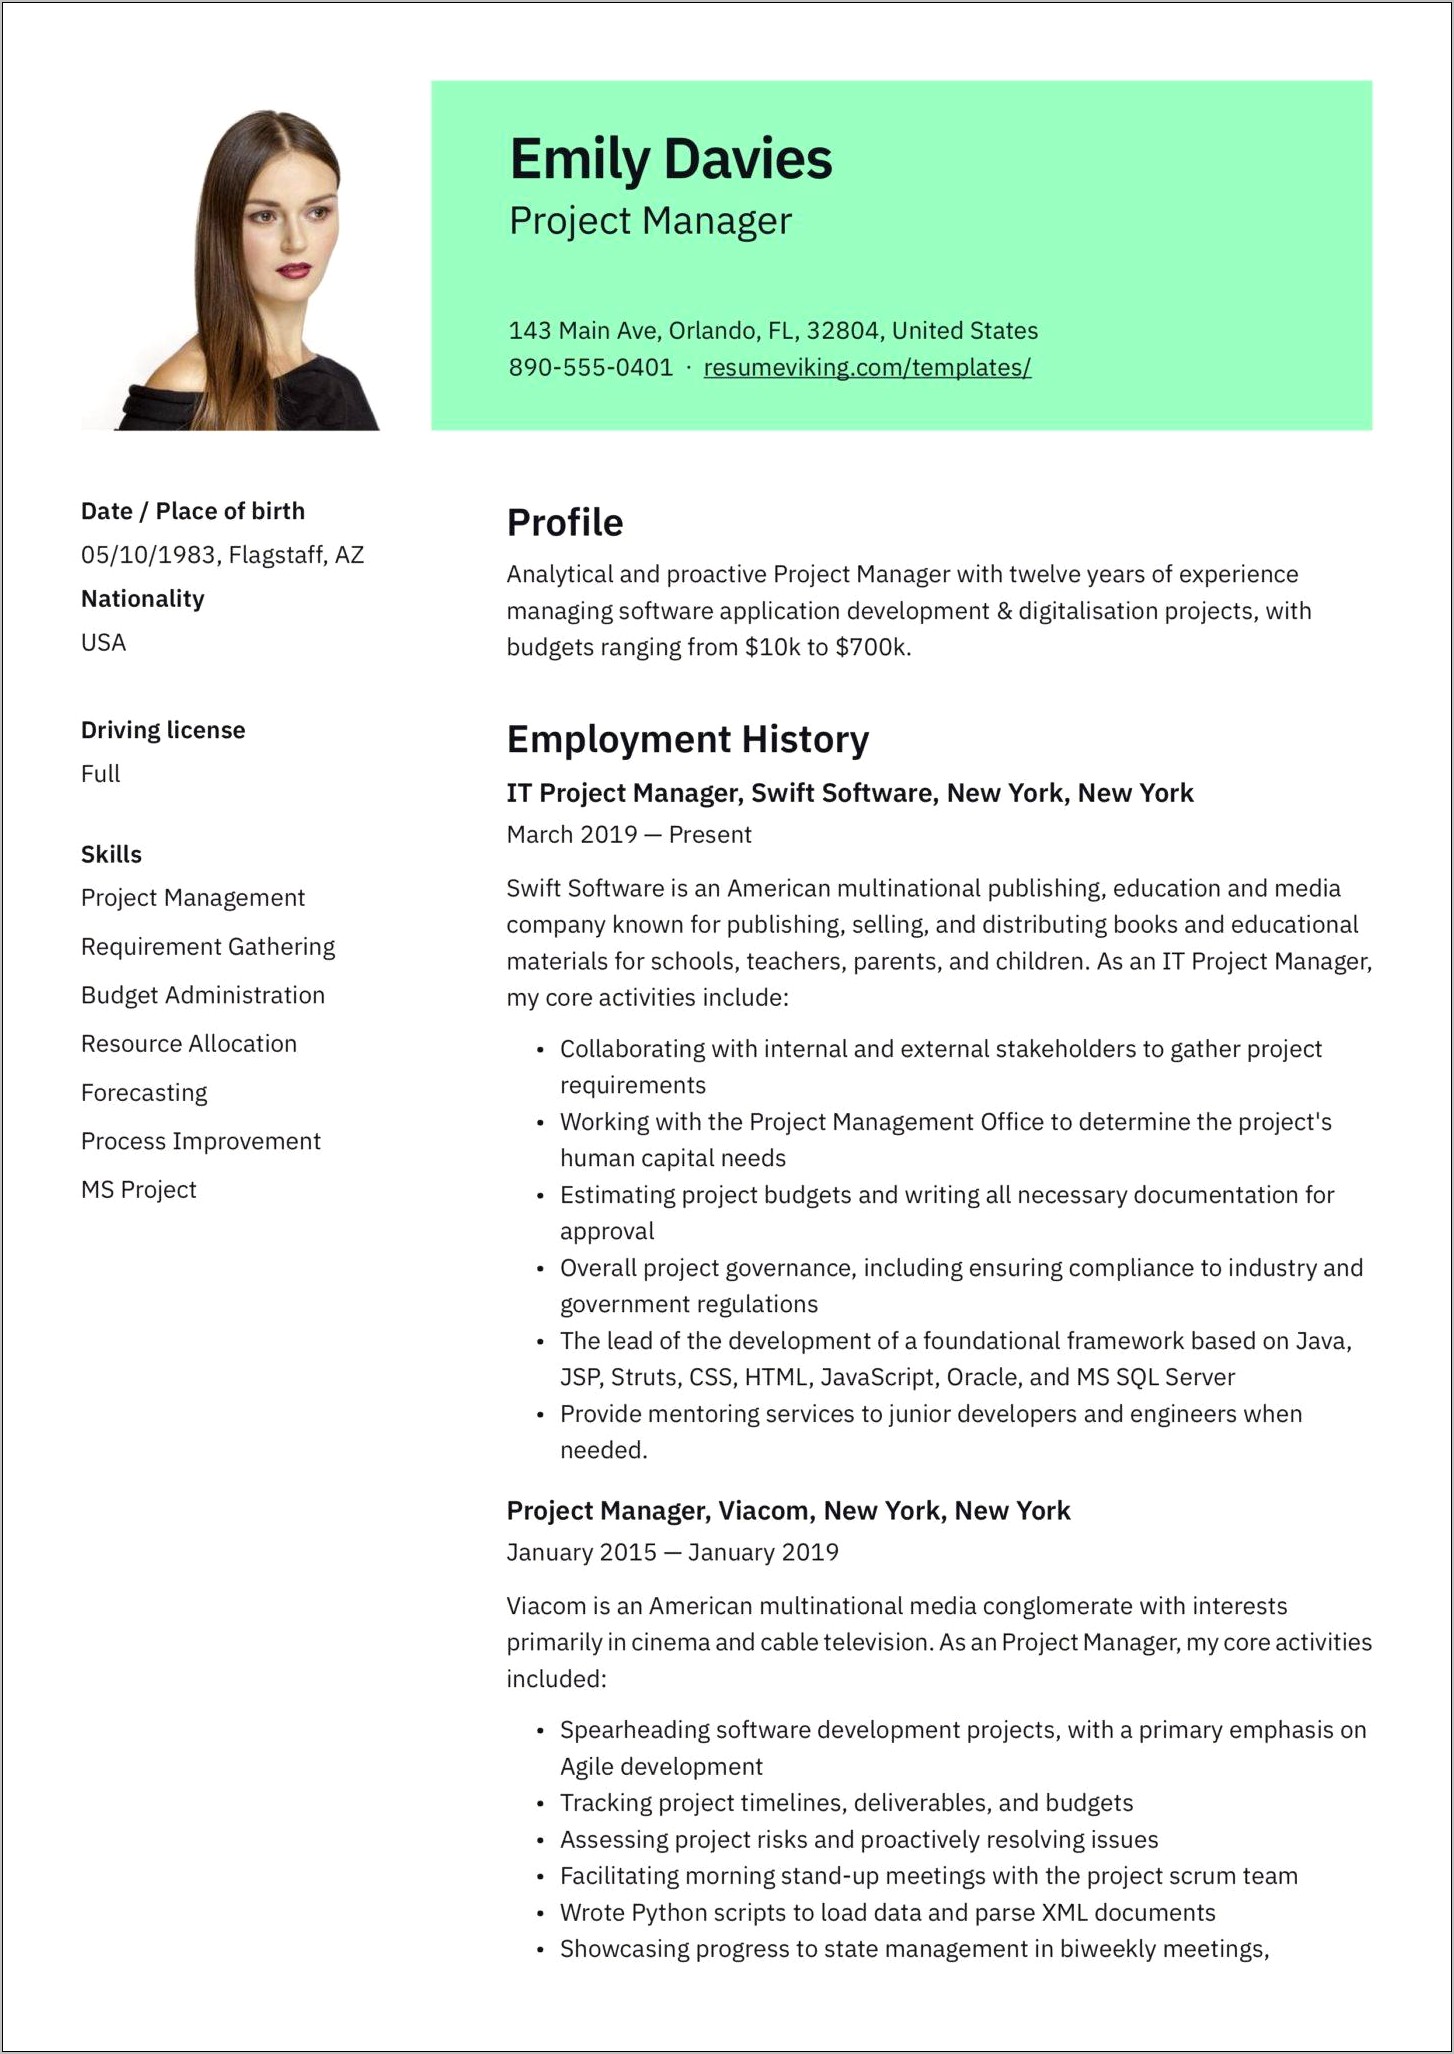 Project Management Statement For Resume